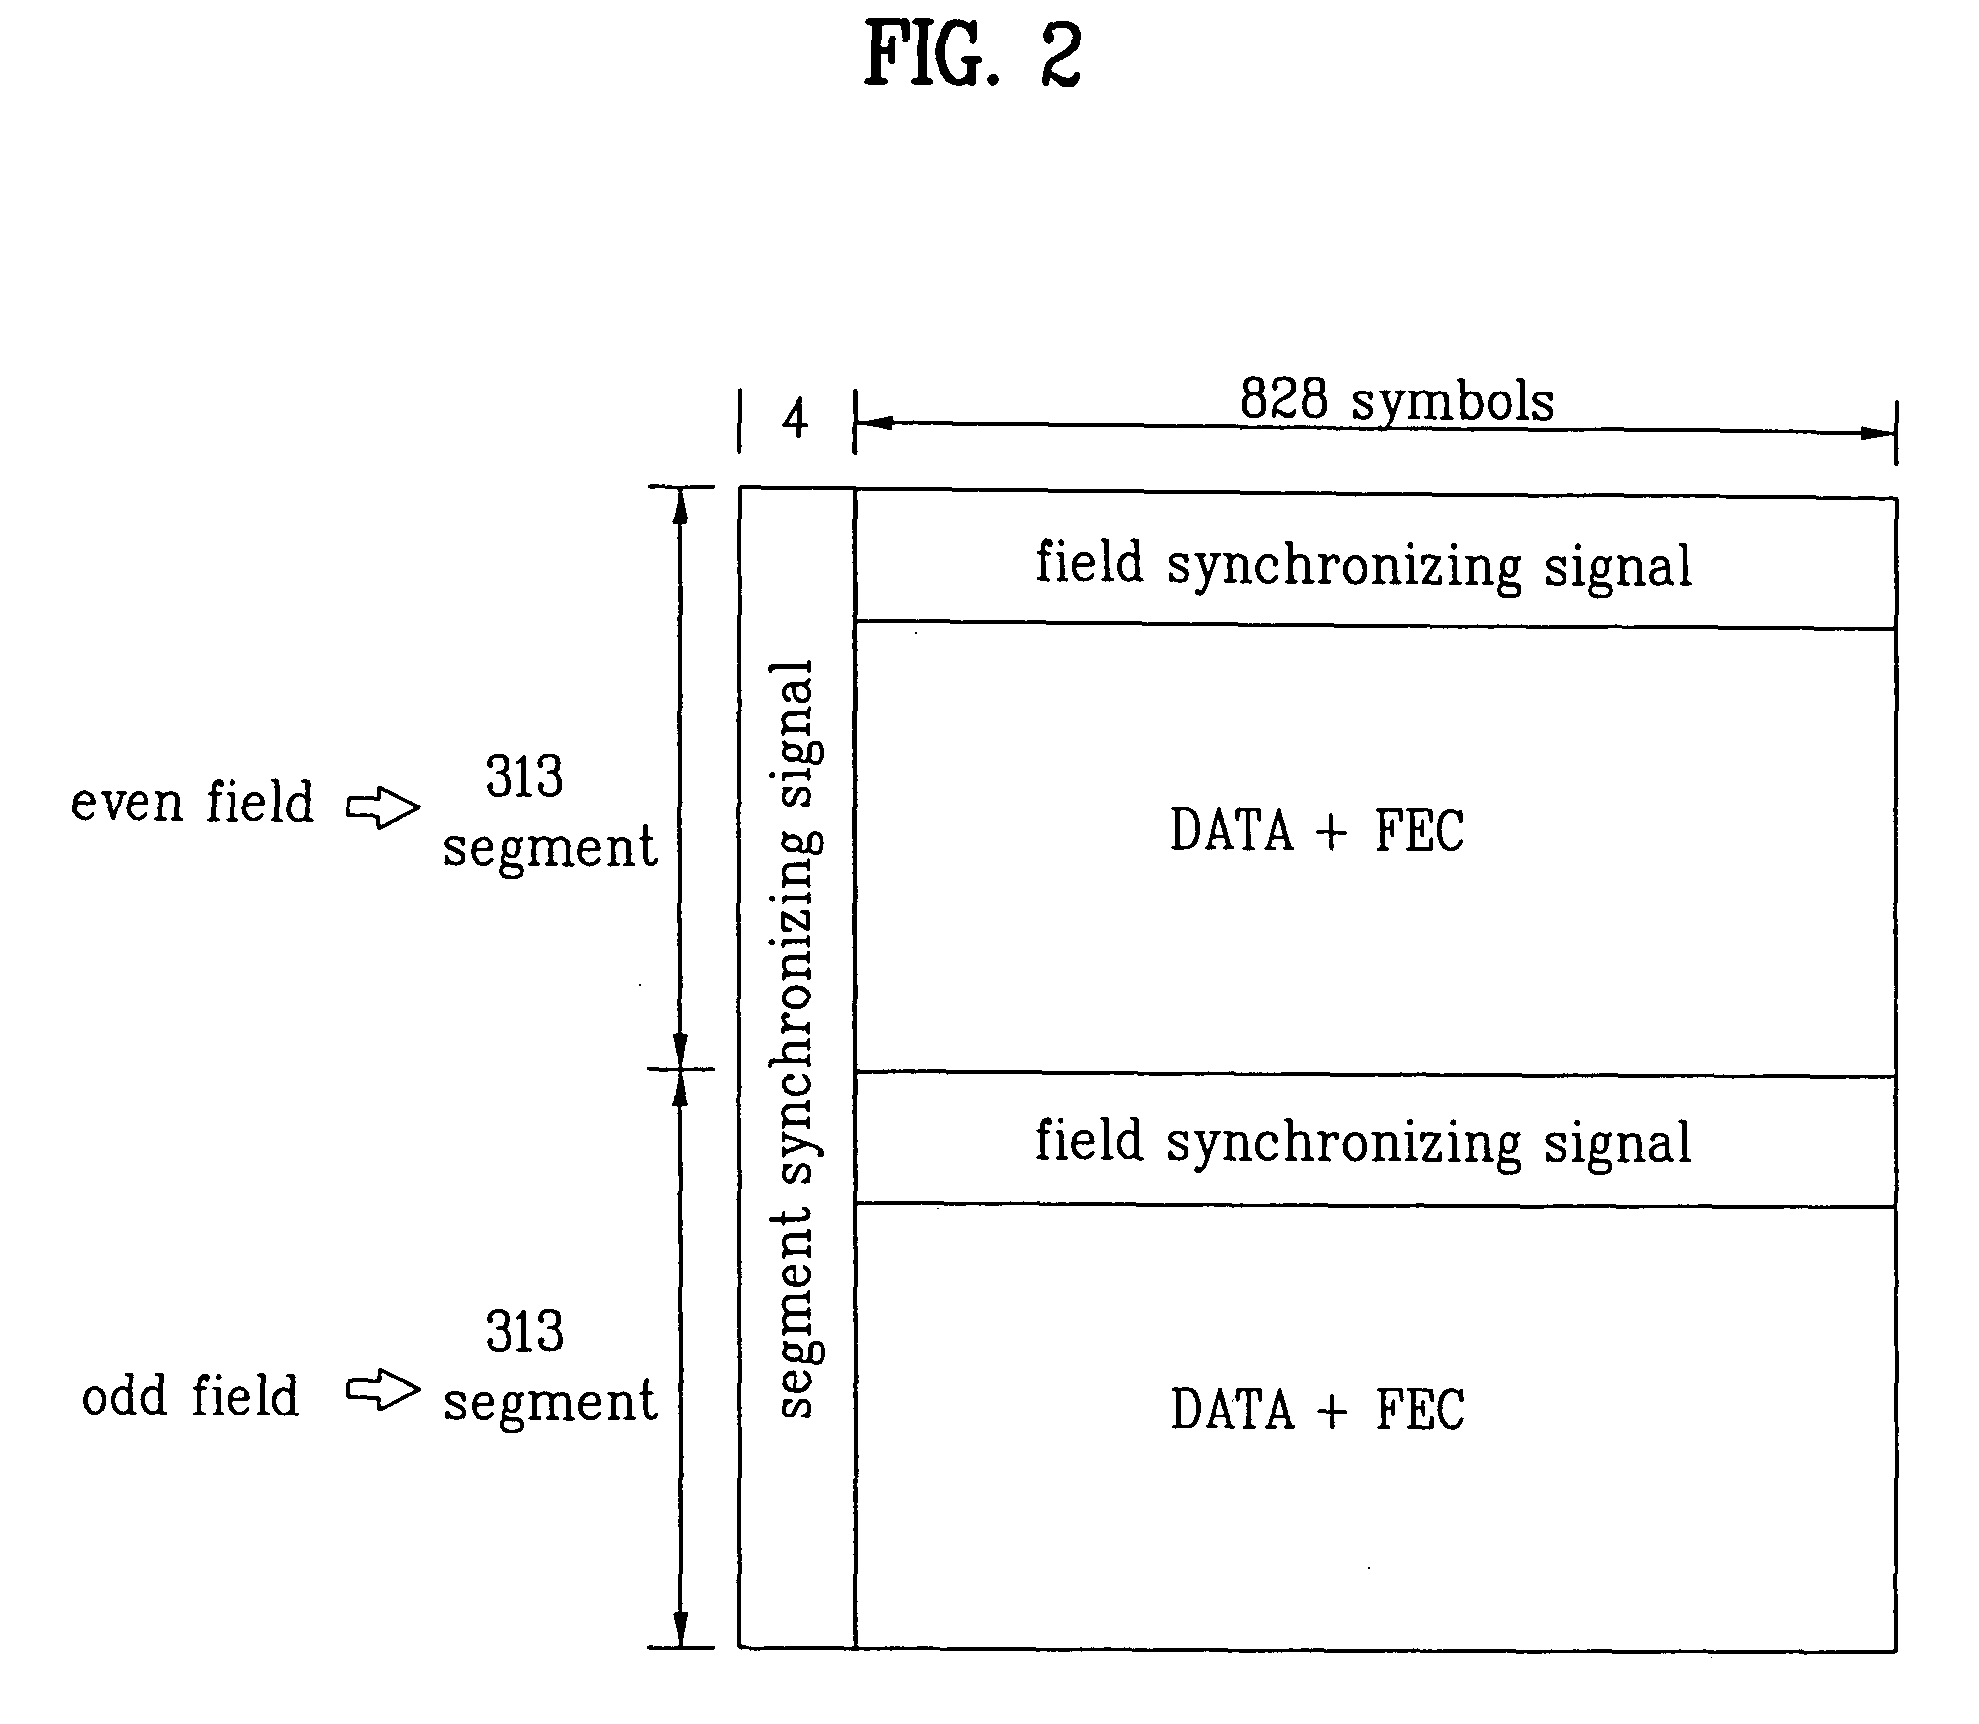 Channel equalizer and digital TV receiver using the same